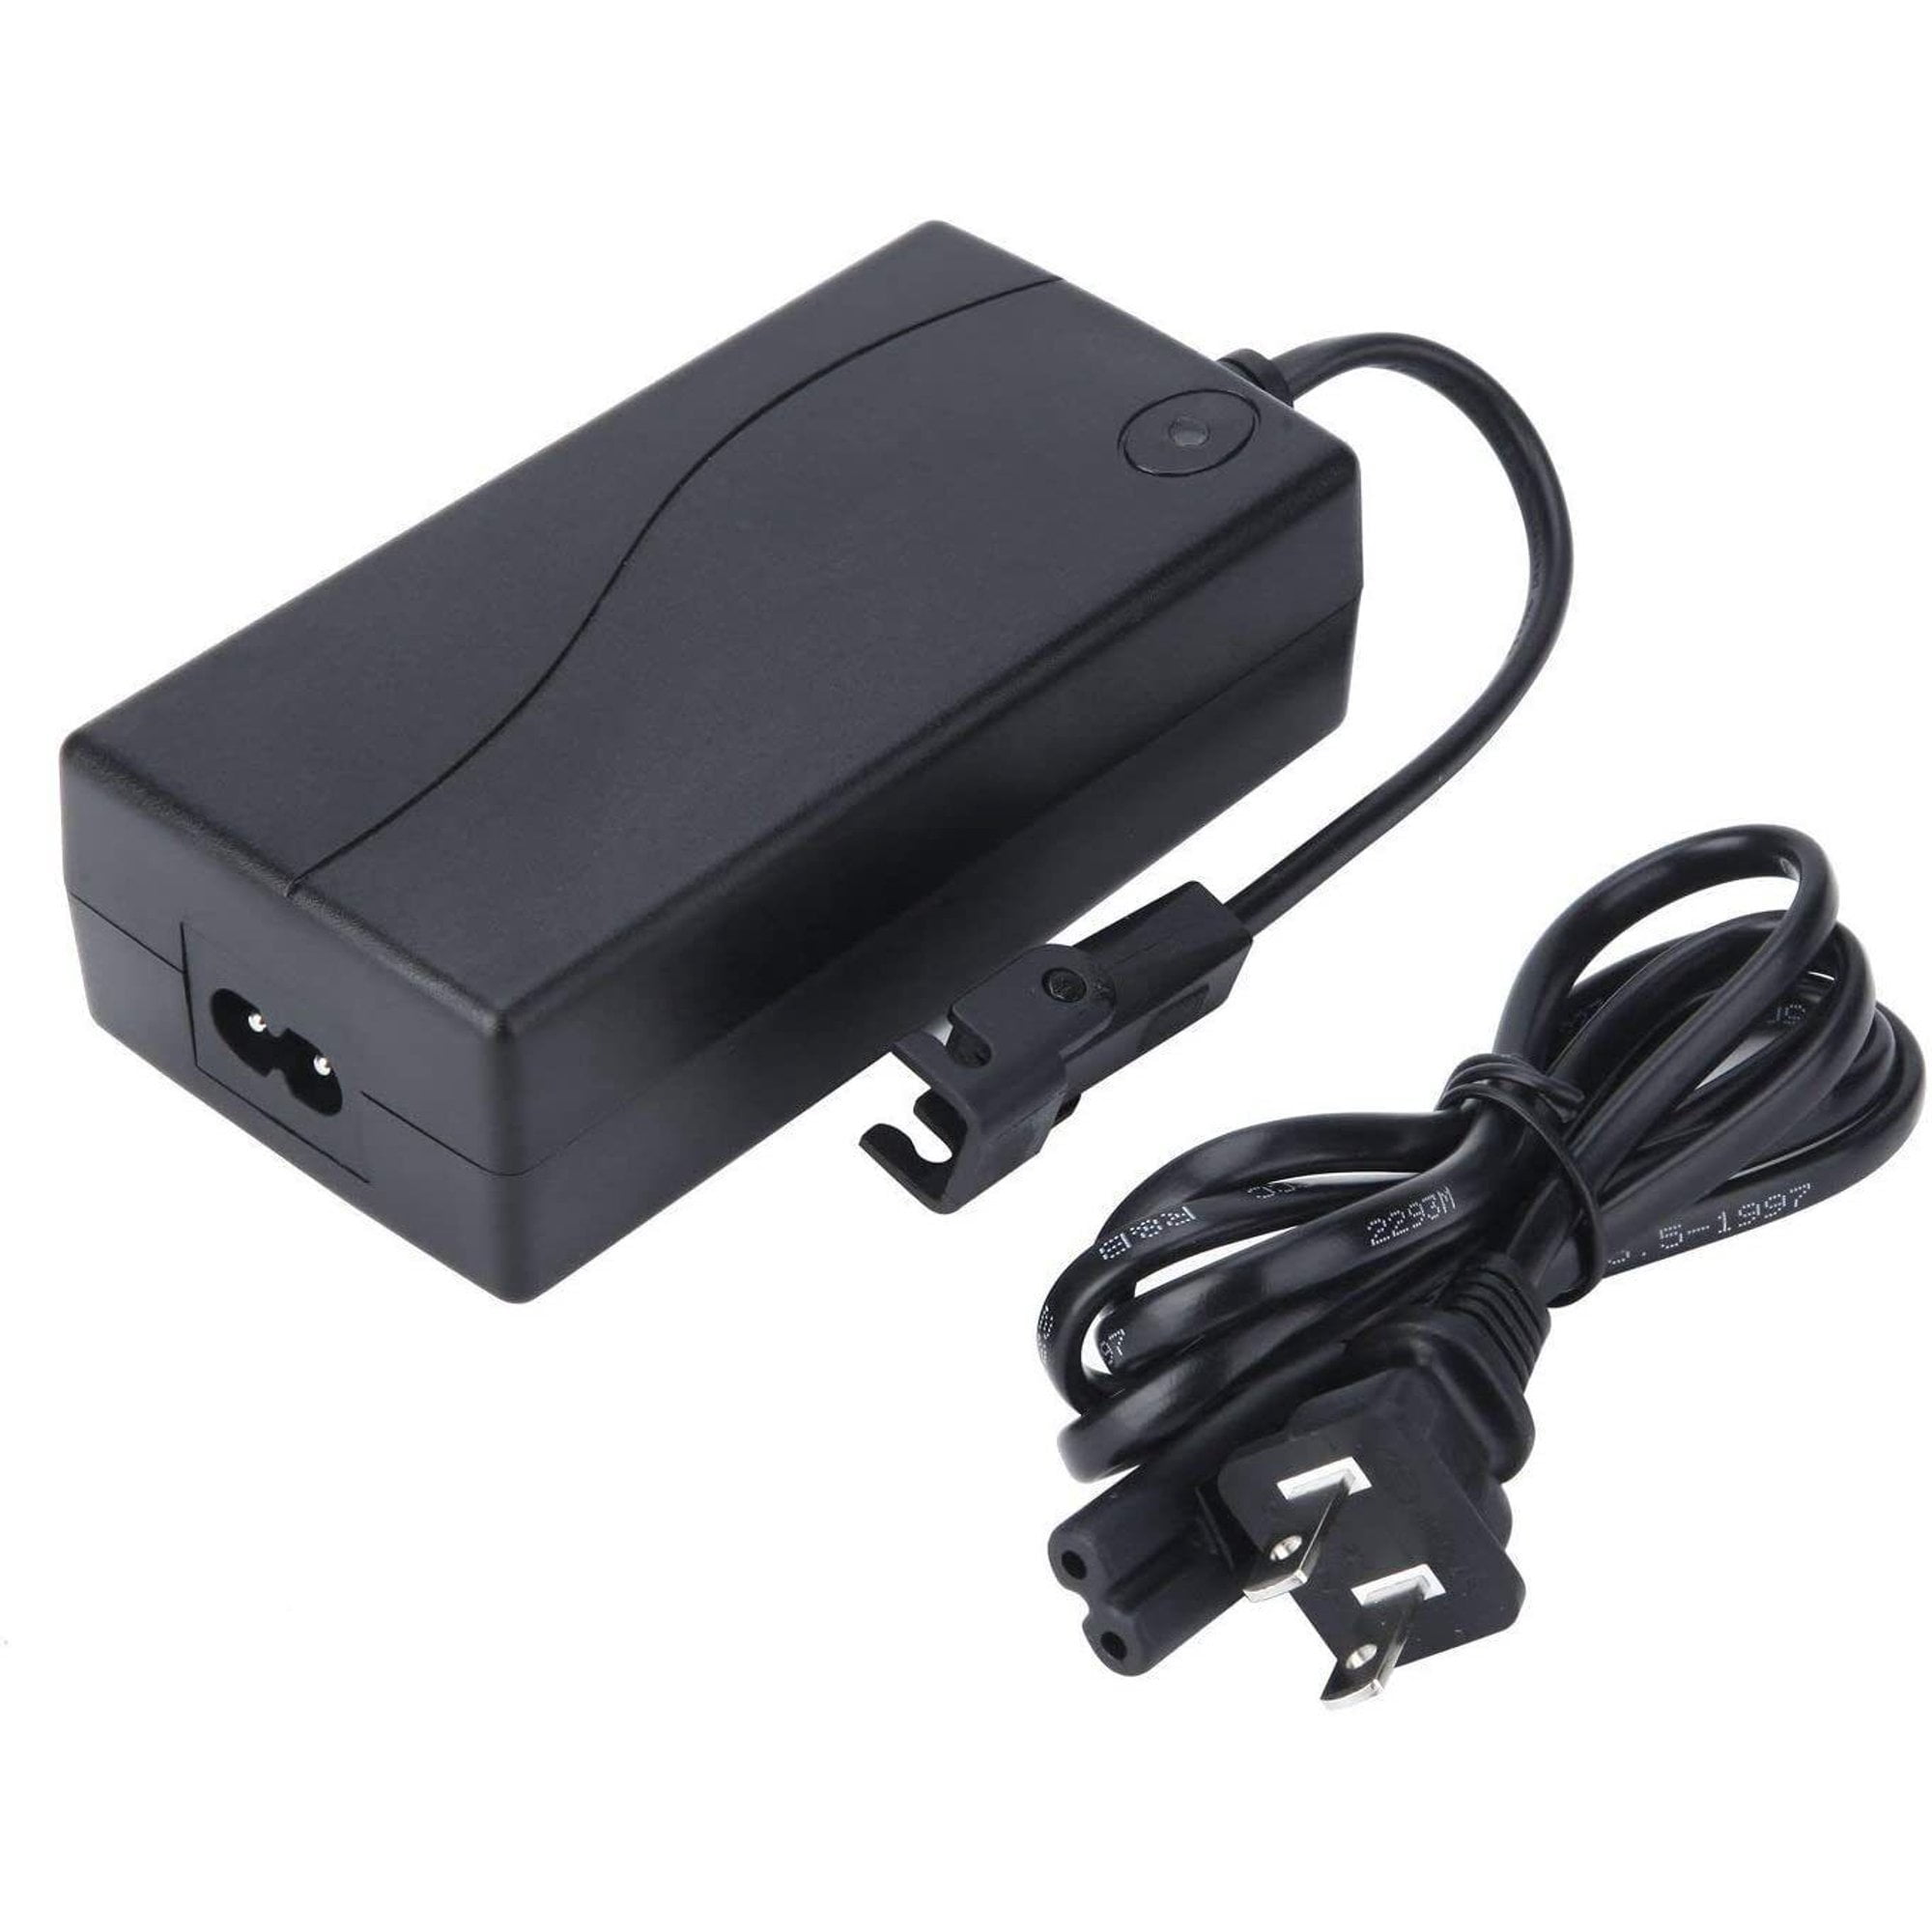 2-Prong 29V AC/DC Adapter Compatible with Changzhou Kaidi Electrical Co Ltd  P/N: KDDY001 KDDY008 KDDY001B 29VDC zb-a290020-b Power Supply Recliner 